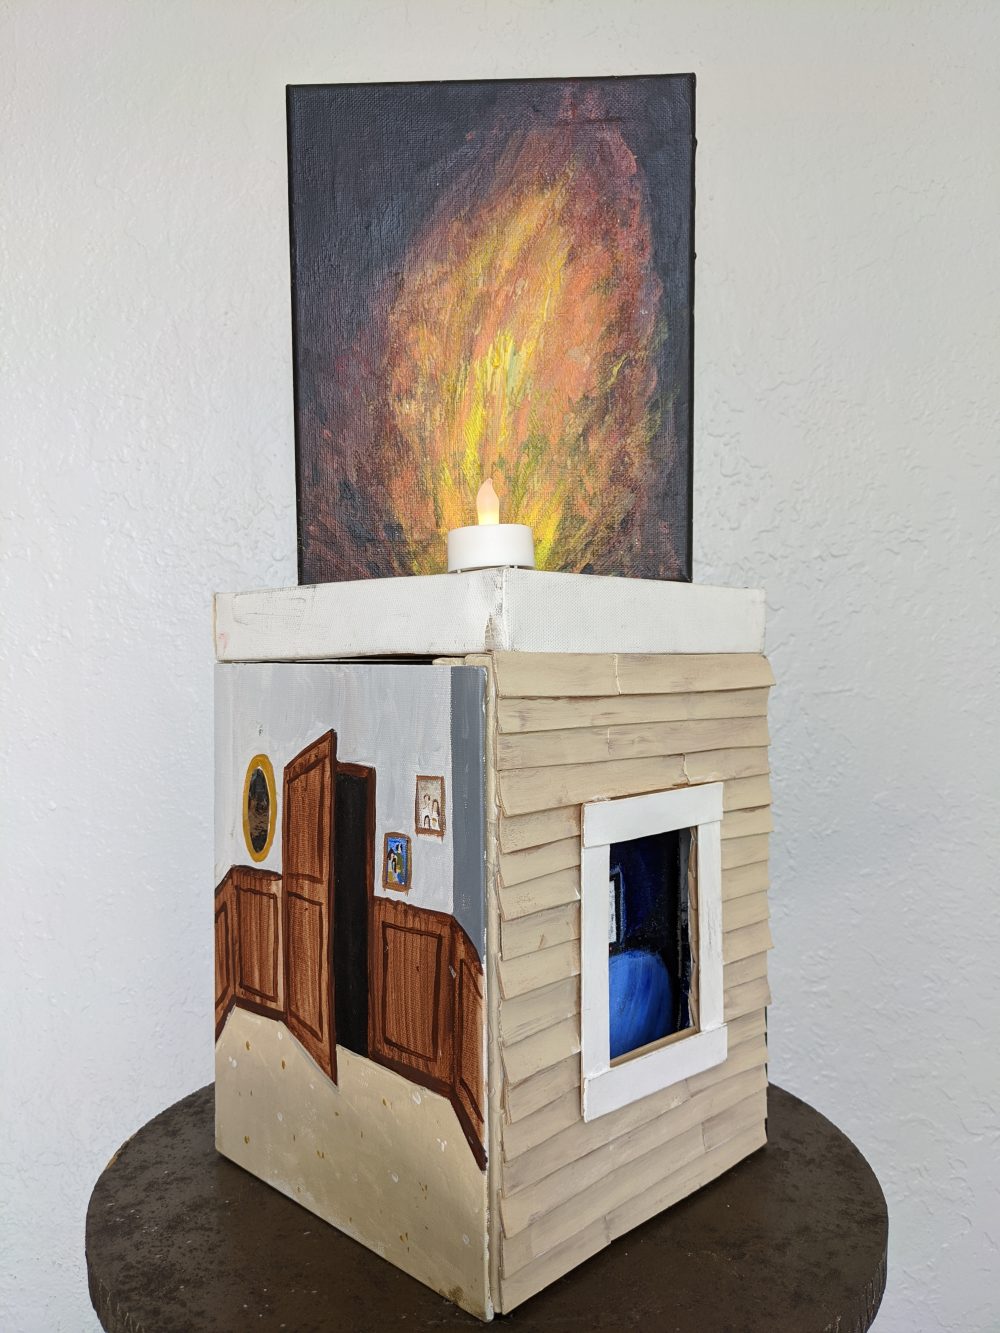 Katherine Wood, The Places I've Slept Won't Let Me Sleep, 2020, acrylic paint, canvas, wooden sticks, battery operated fairy lights and candles, 24" x 14"